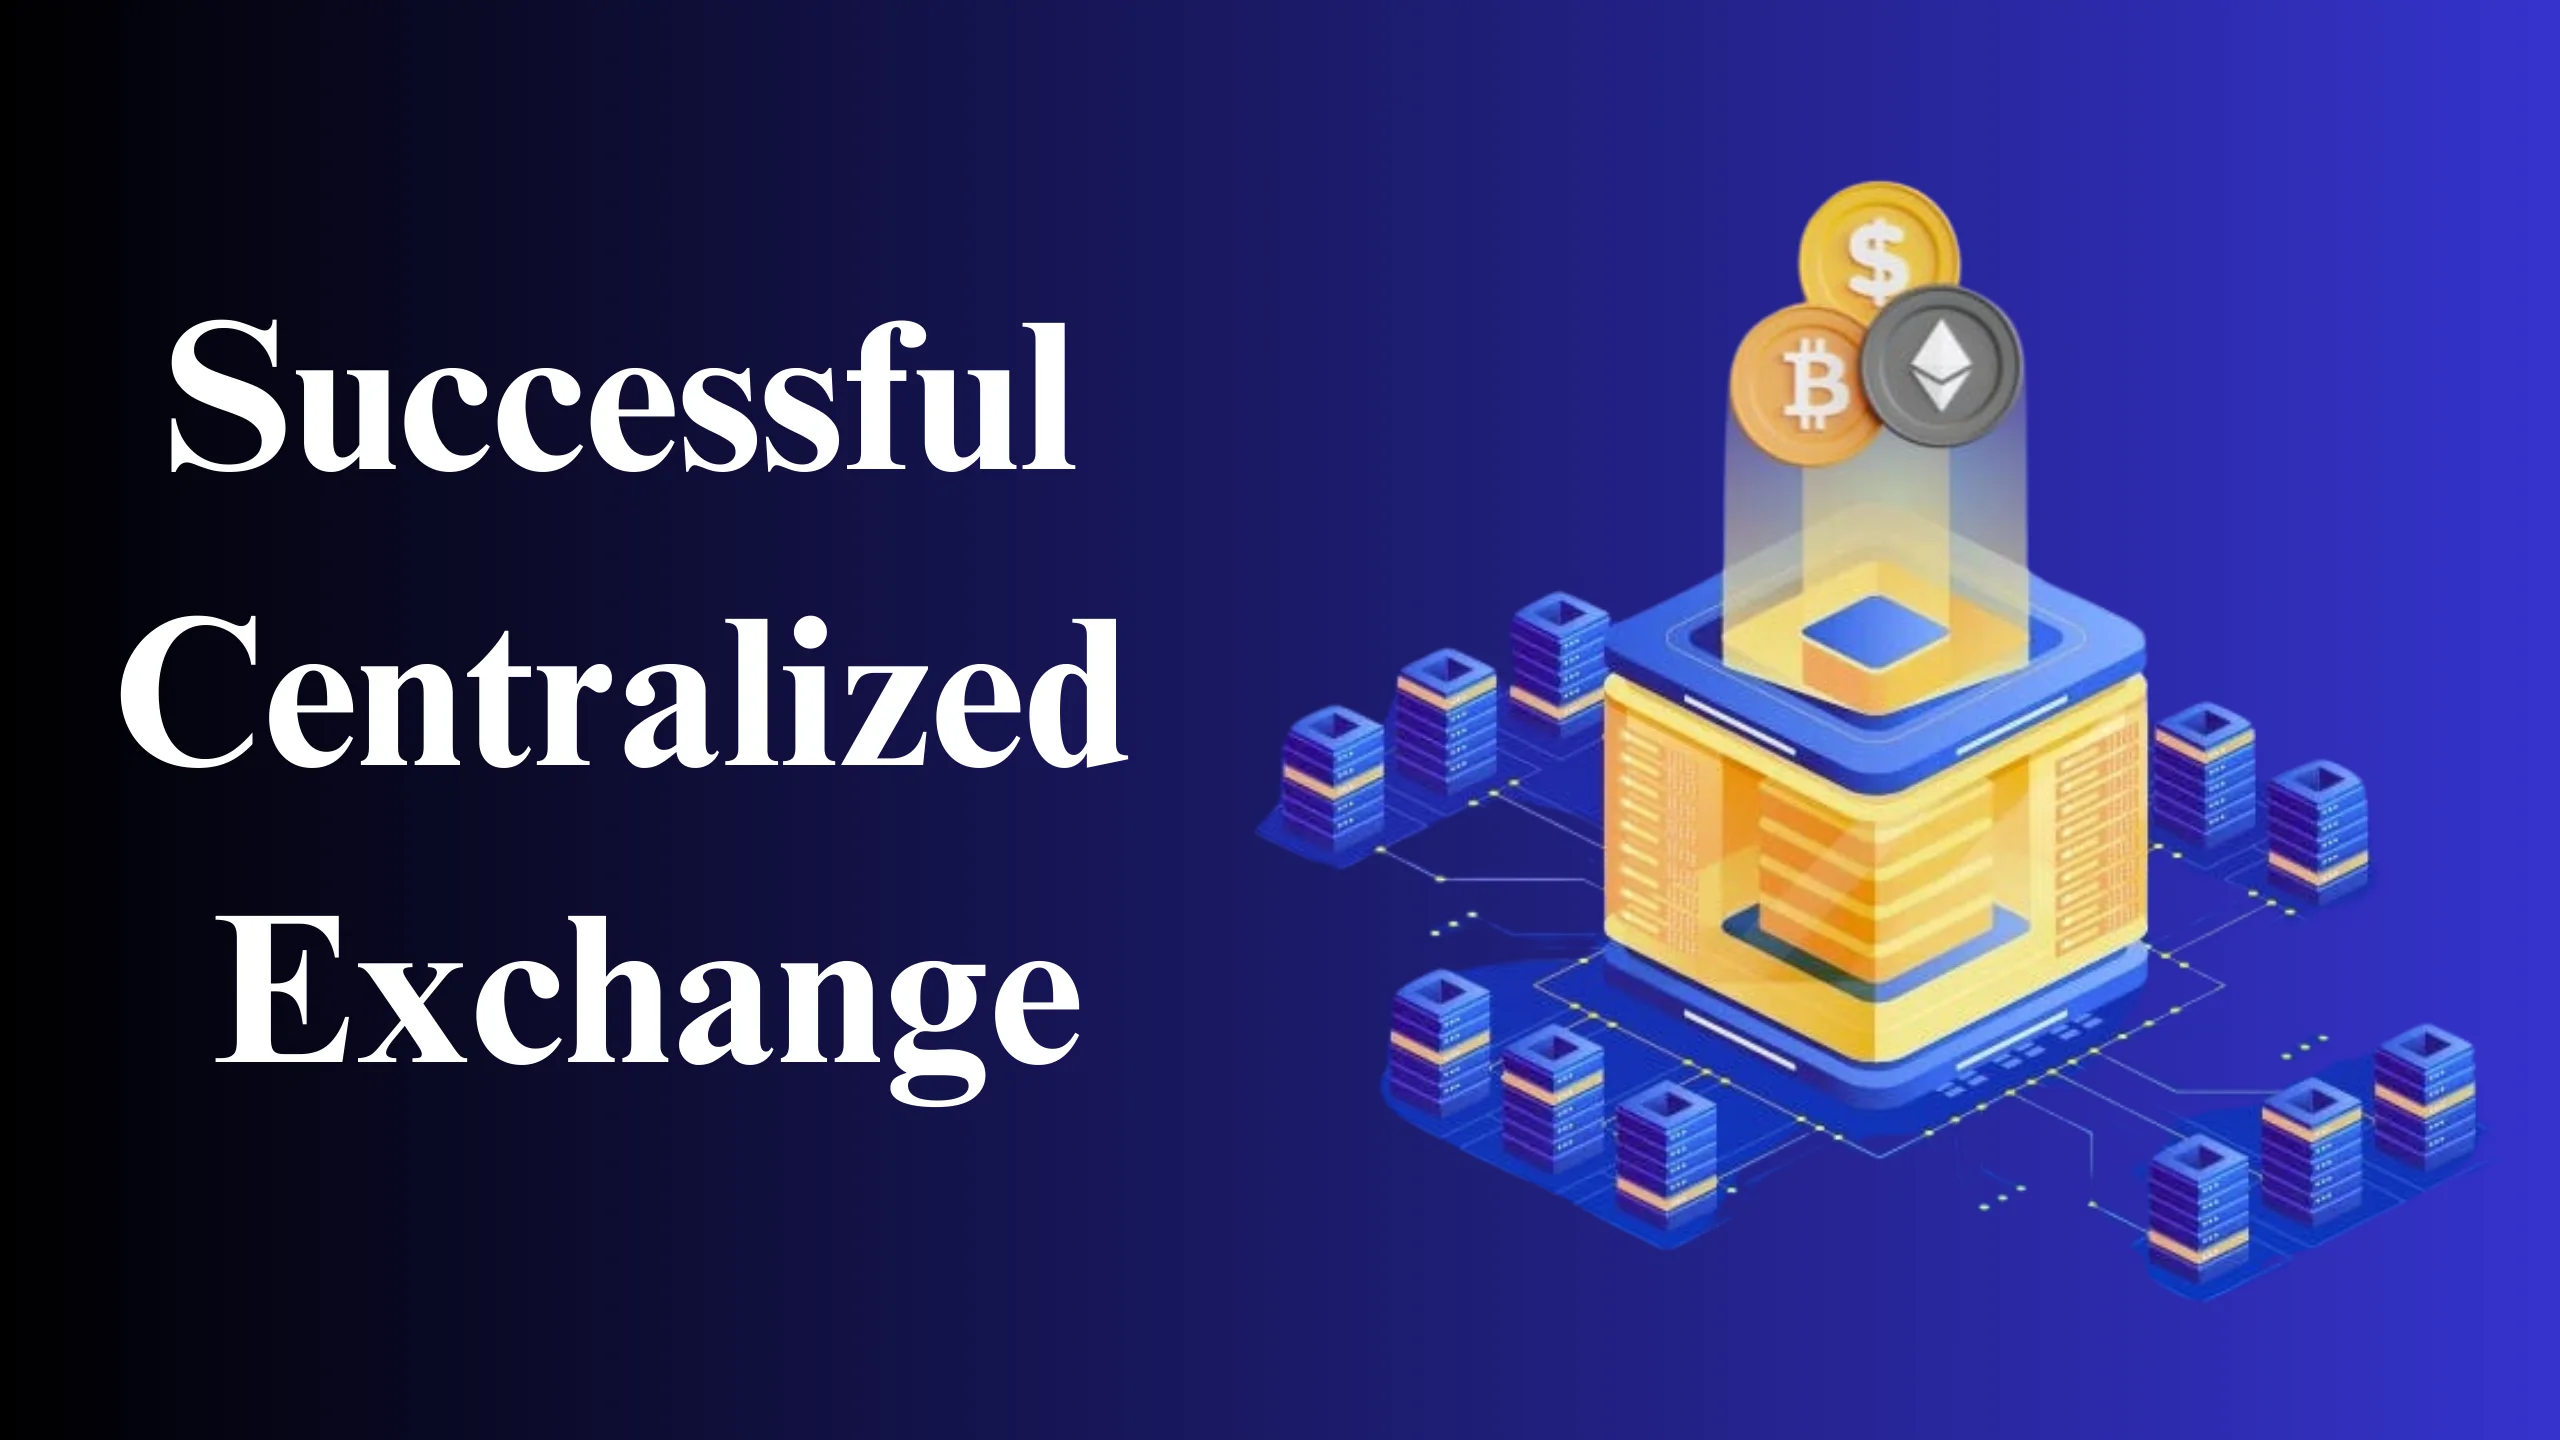 Learn how to create a successful centralized exchange by incorporating essential elements such as robust security, user-friendly interfaces, and efficient transaction processing. These features ensure a reliable and competitive trading platform.